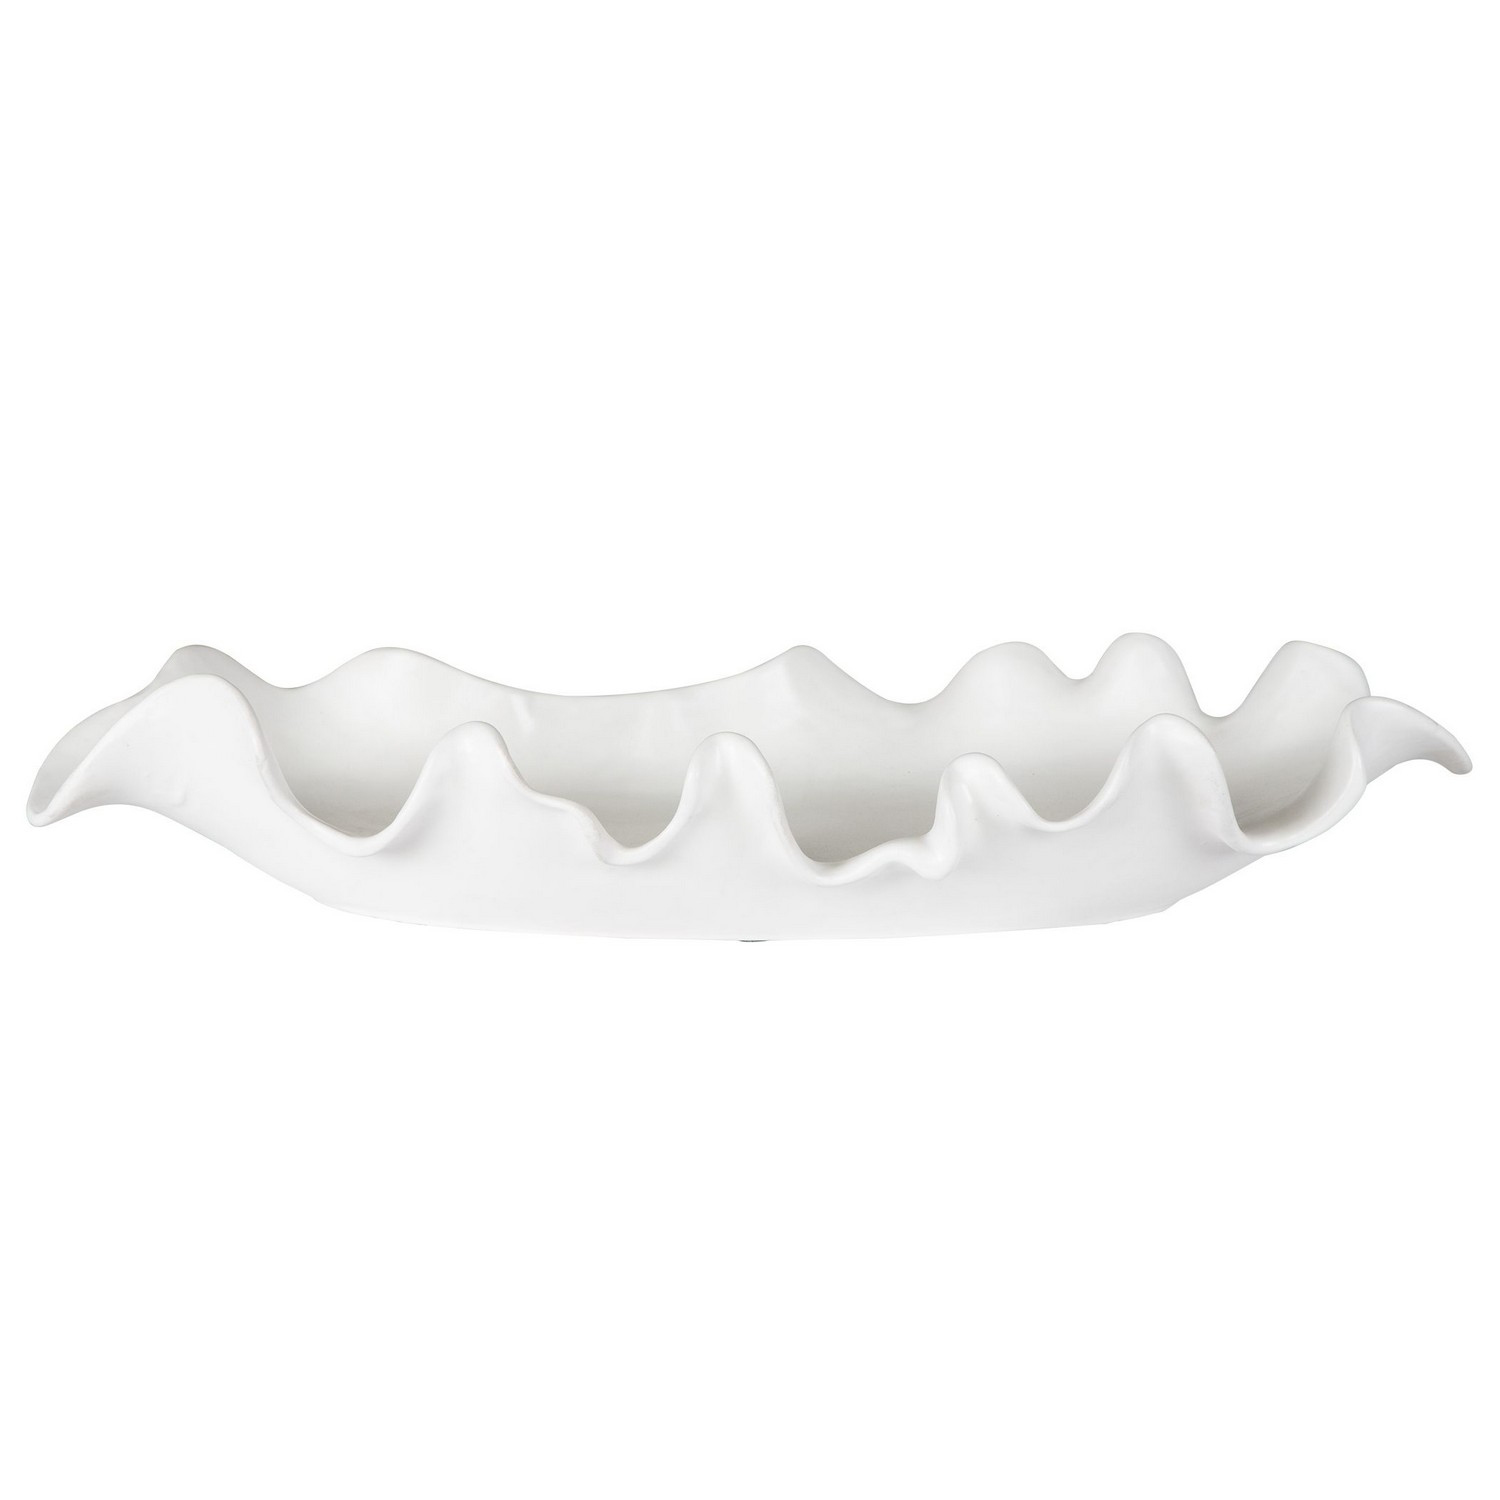 Uttermost Ruffled Feathers Modern Bowl - White